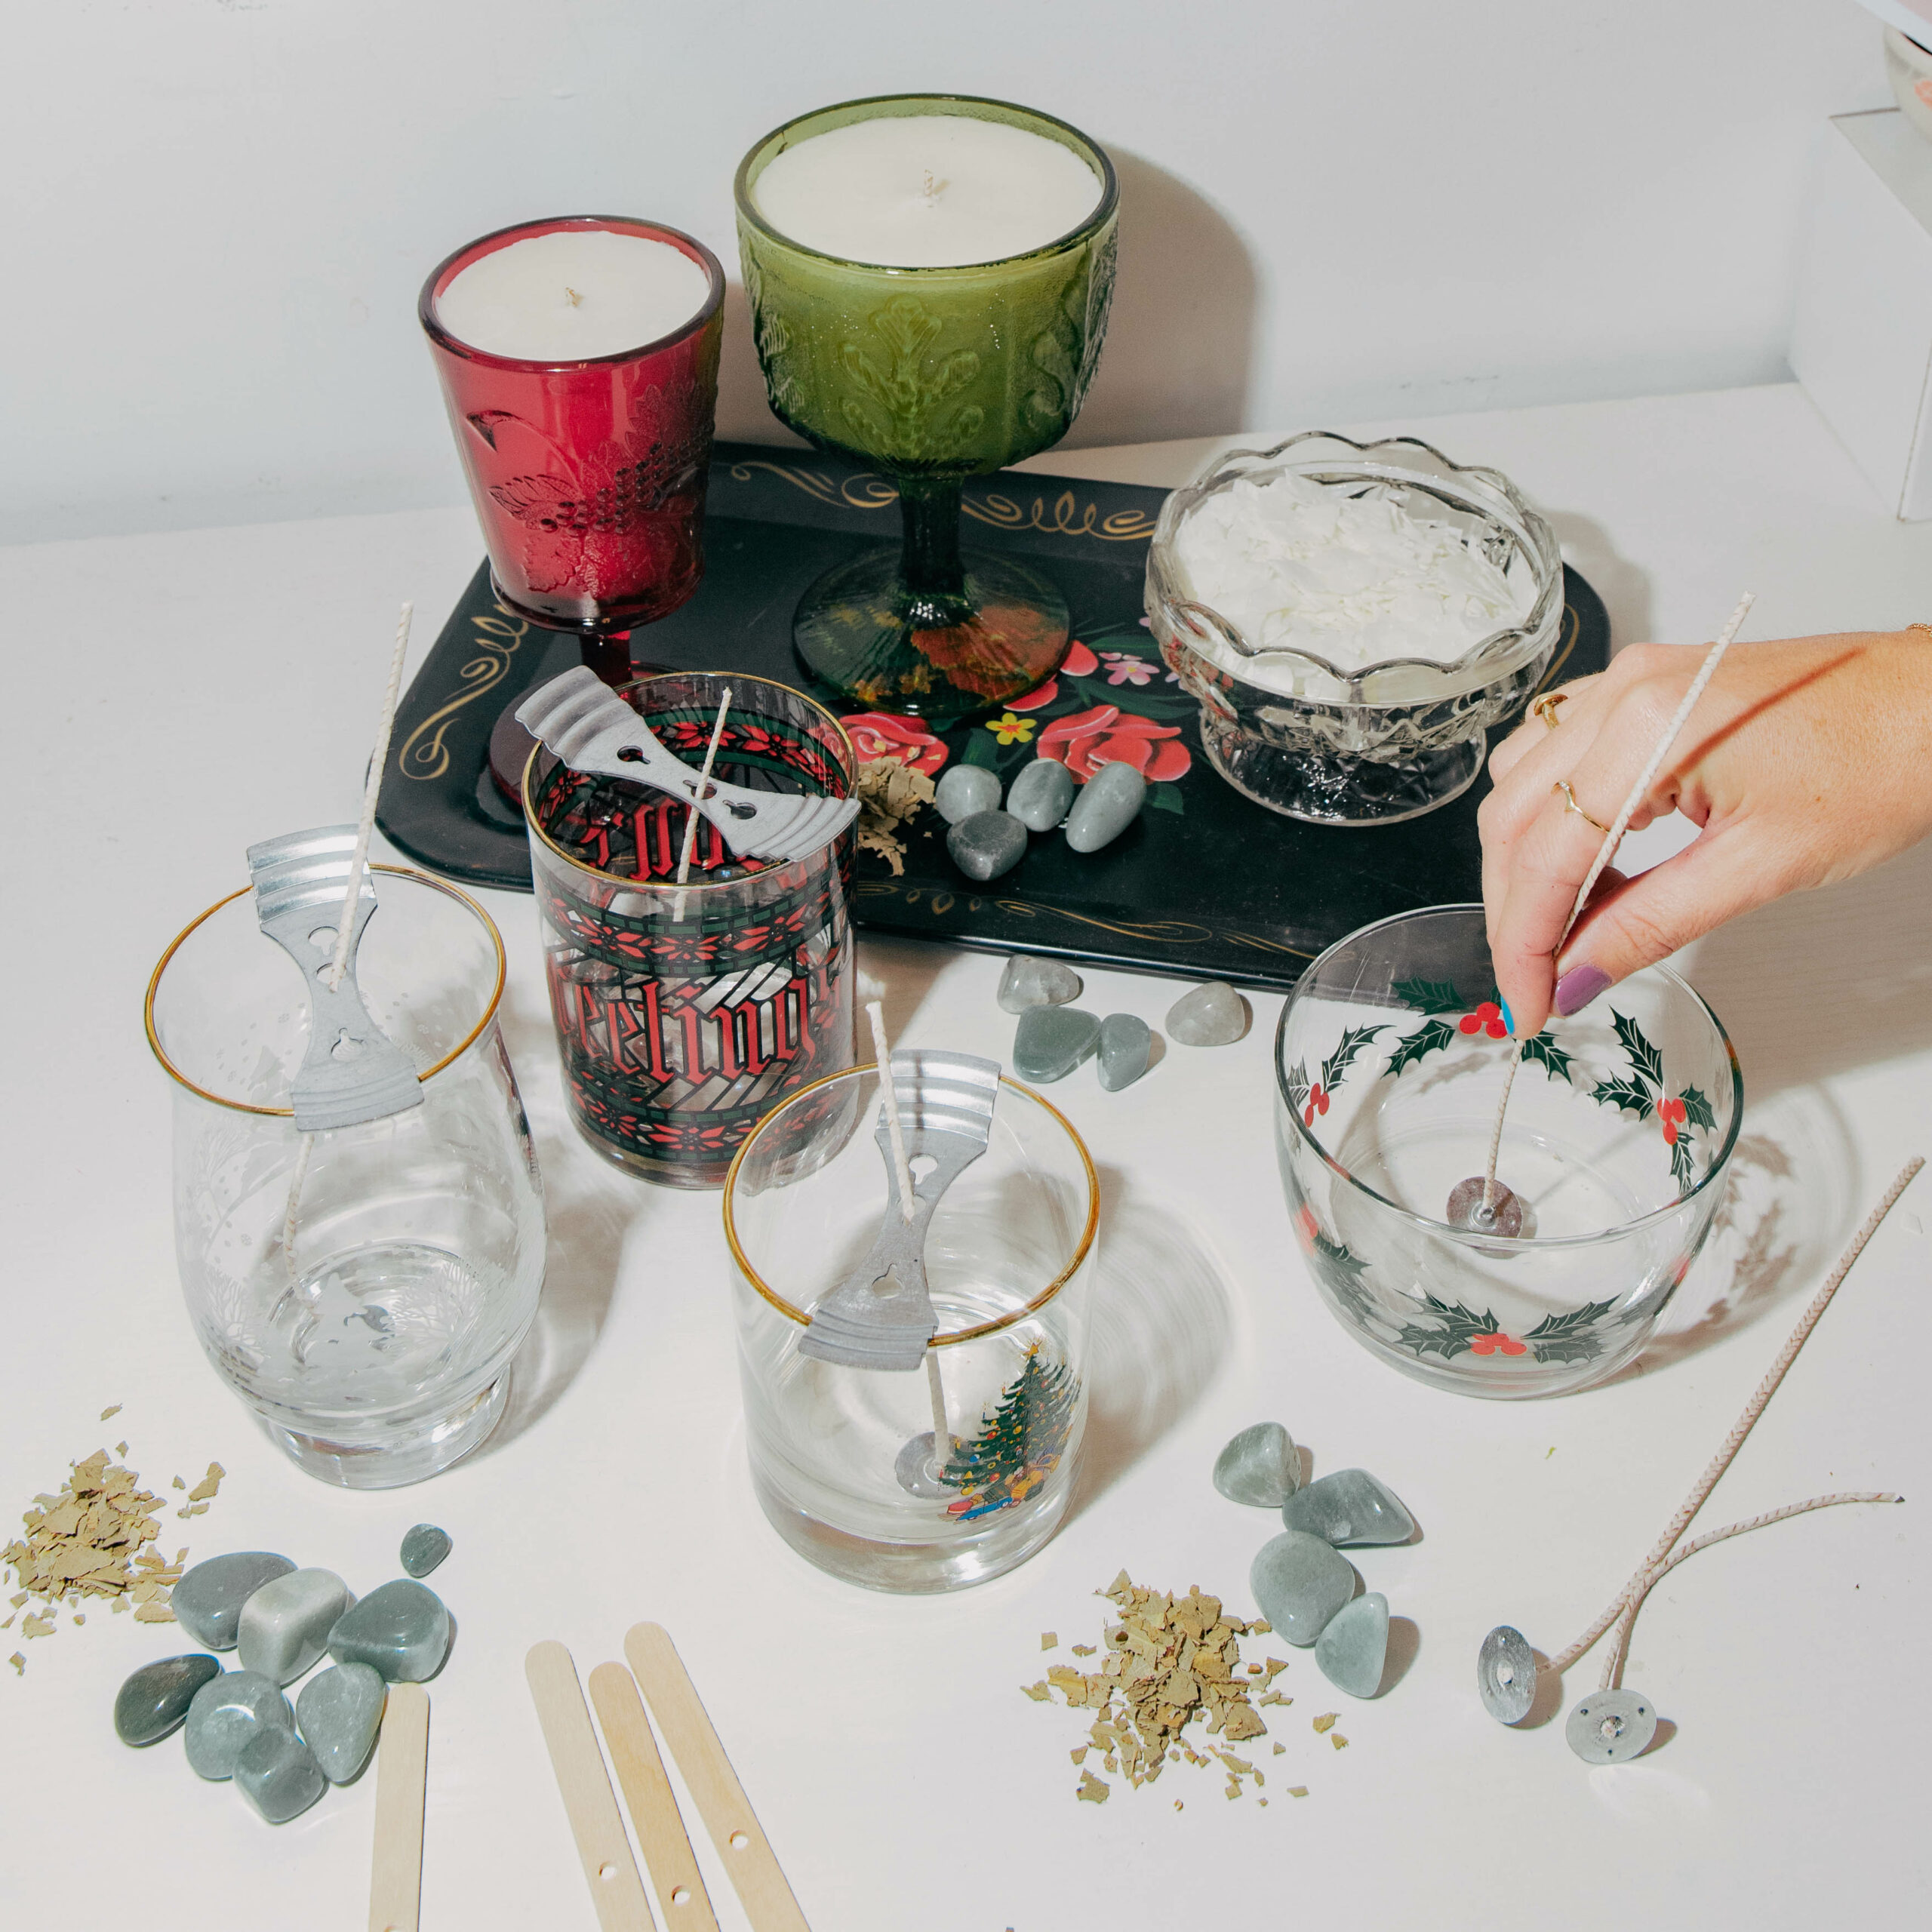 Holiday Candle Making Workshop with Local Artist Daisy McClellan